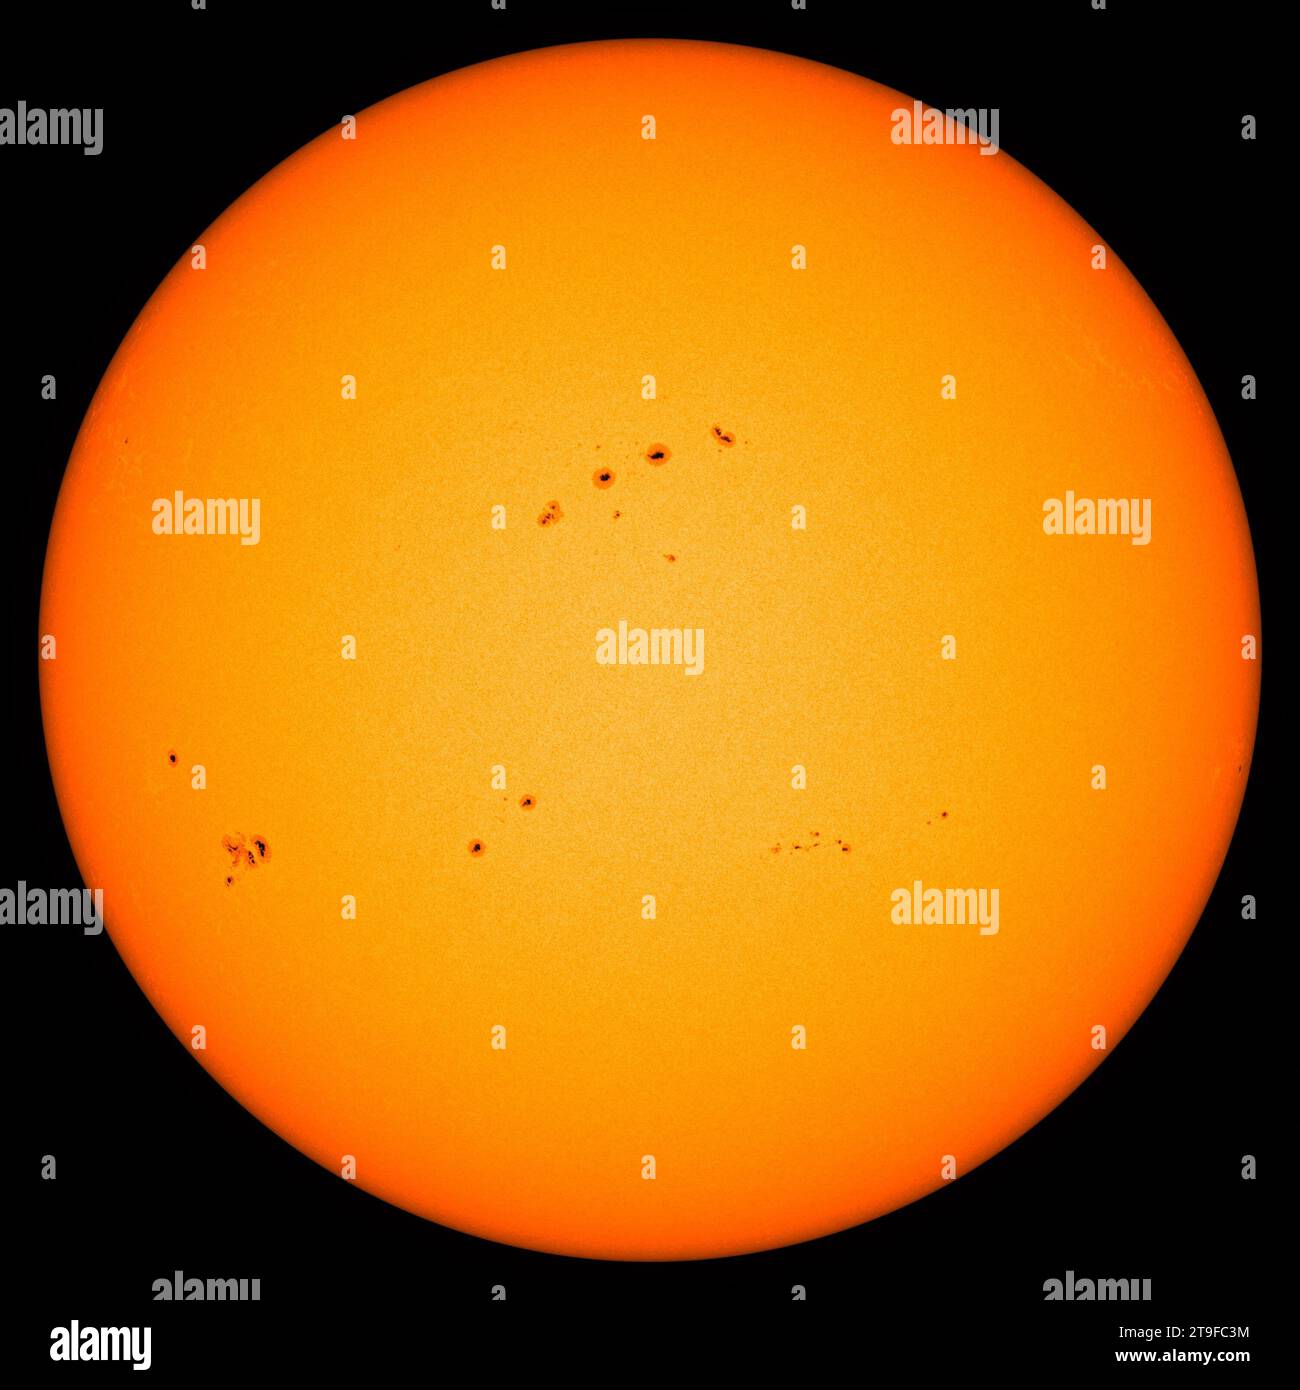 Detailed image of the sun where large groups of sunpots can be seen. Stock Photo